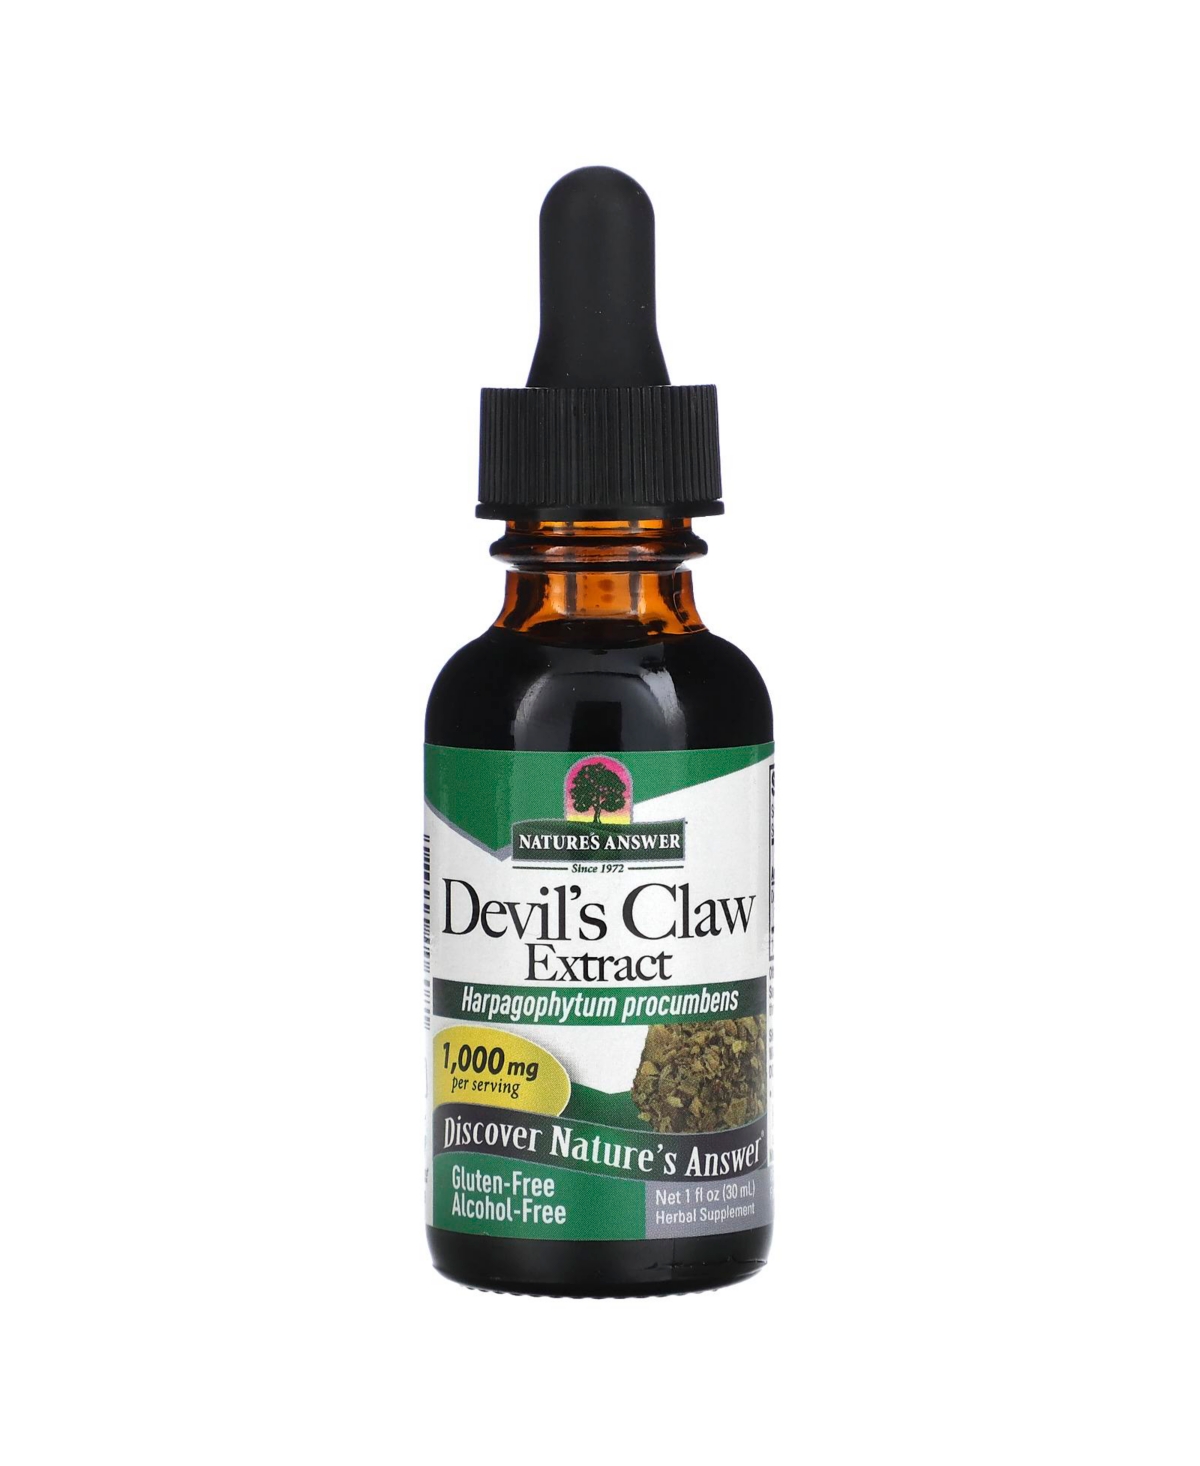 Devil's Claw Extract Alcohol-Free 1 000 mg - 1 fl oz (30 ml) - Assorted Pre-pack (See Table